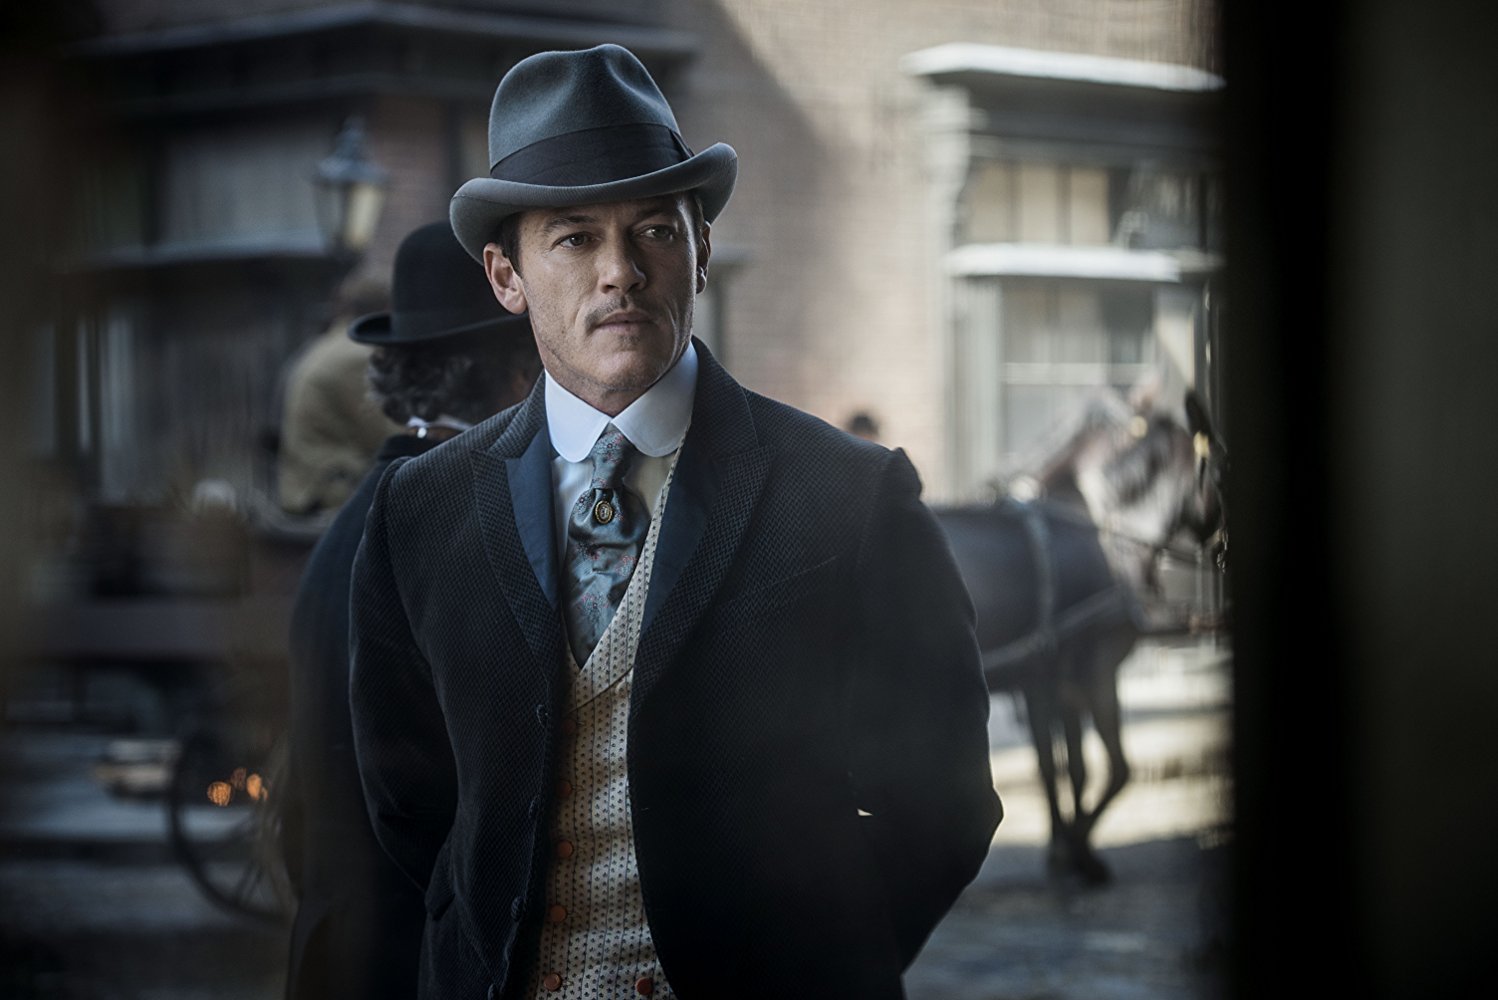 Tour the set of ”The Alienist” with Luke Evans in Budapest